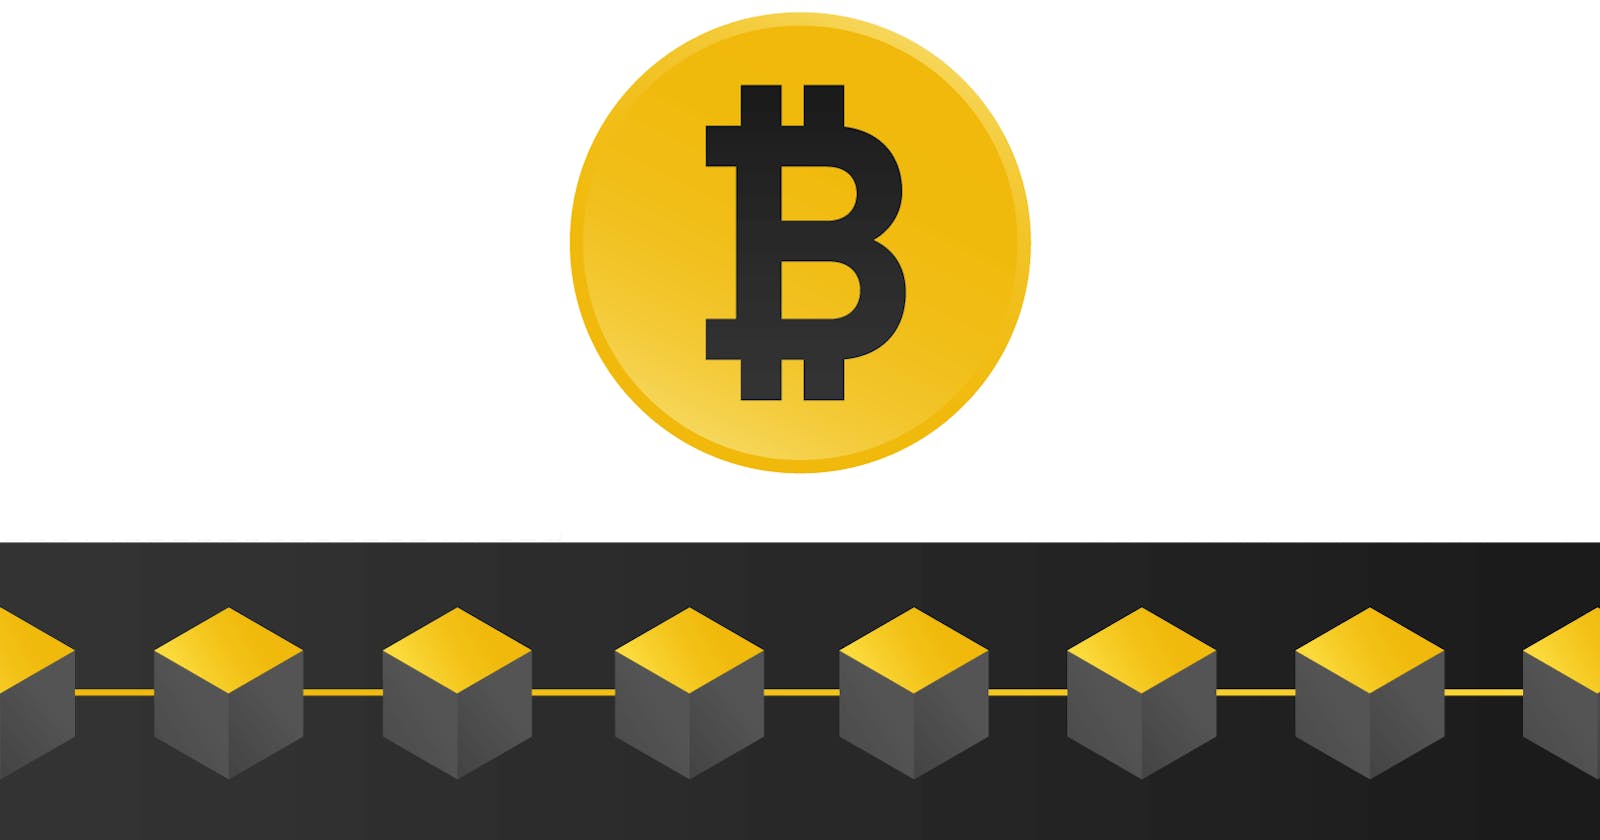 Difference Between Blockchain and Bitcoin